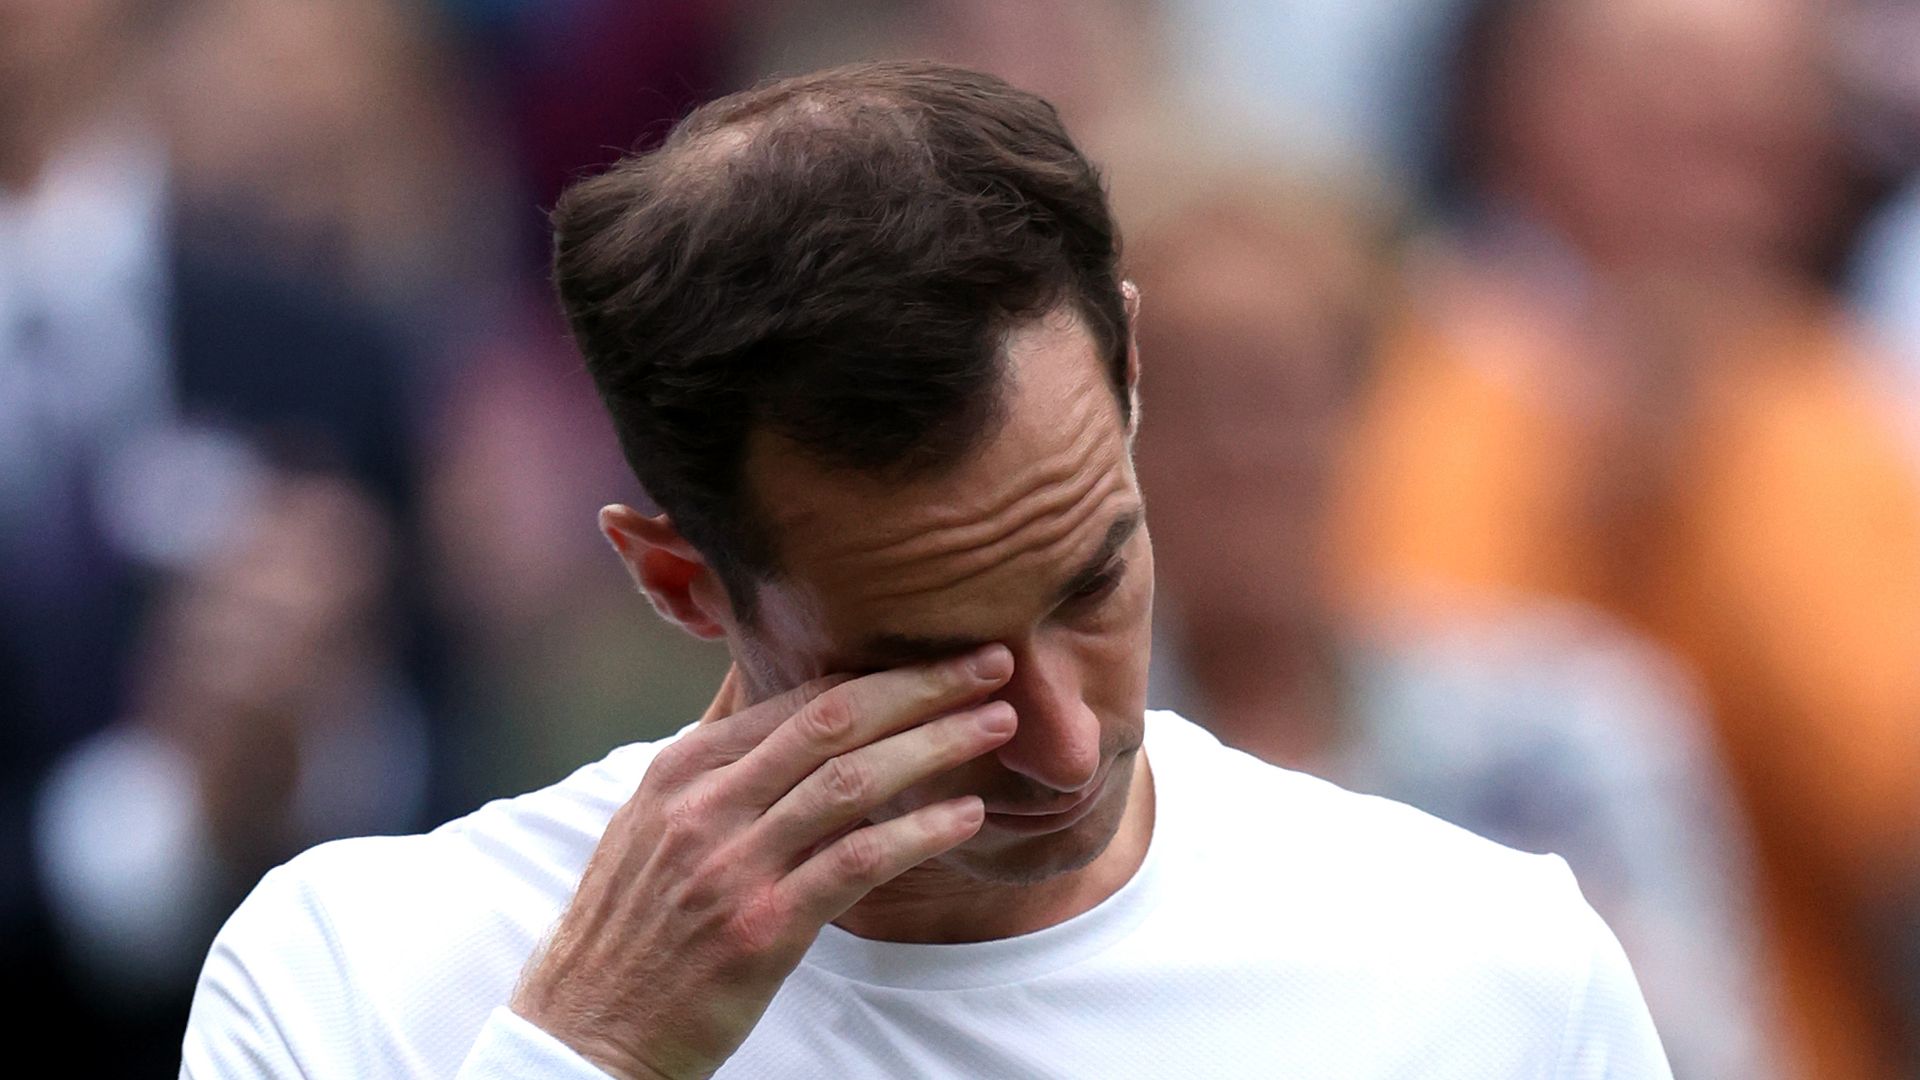 Andy Murray wiping a tear away from his face